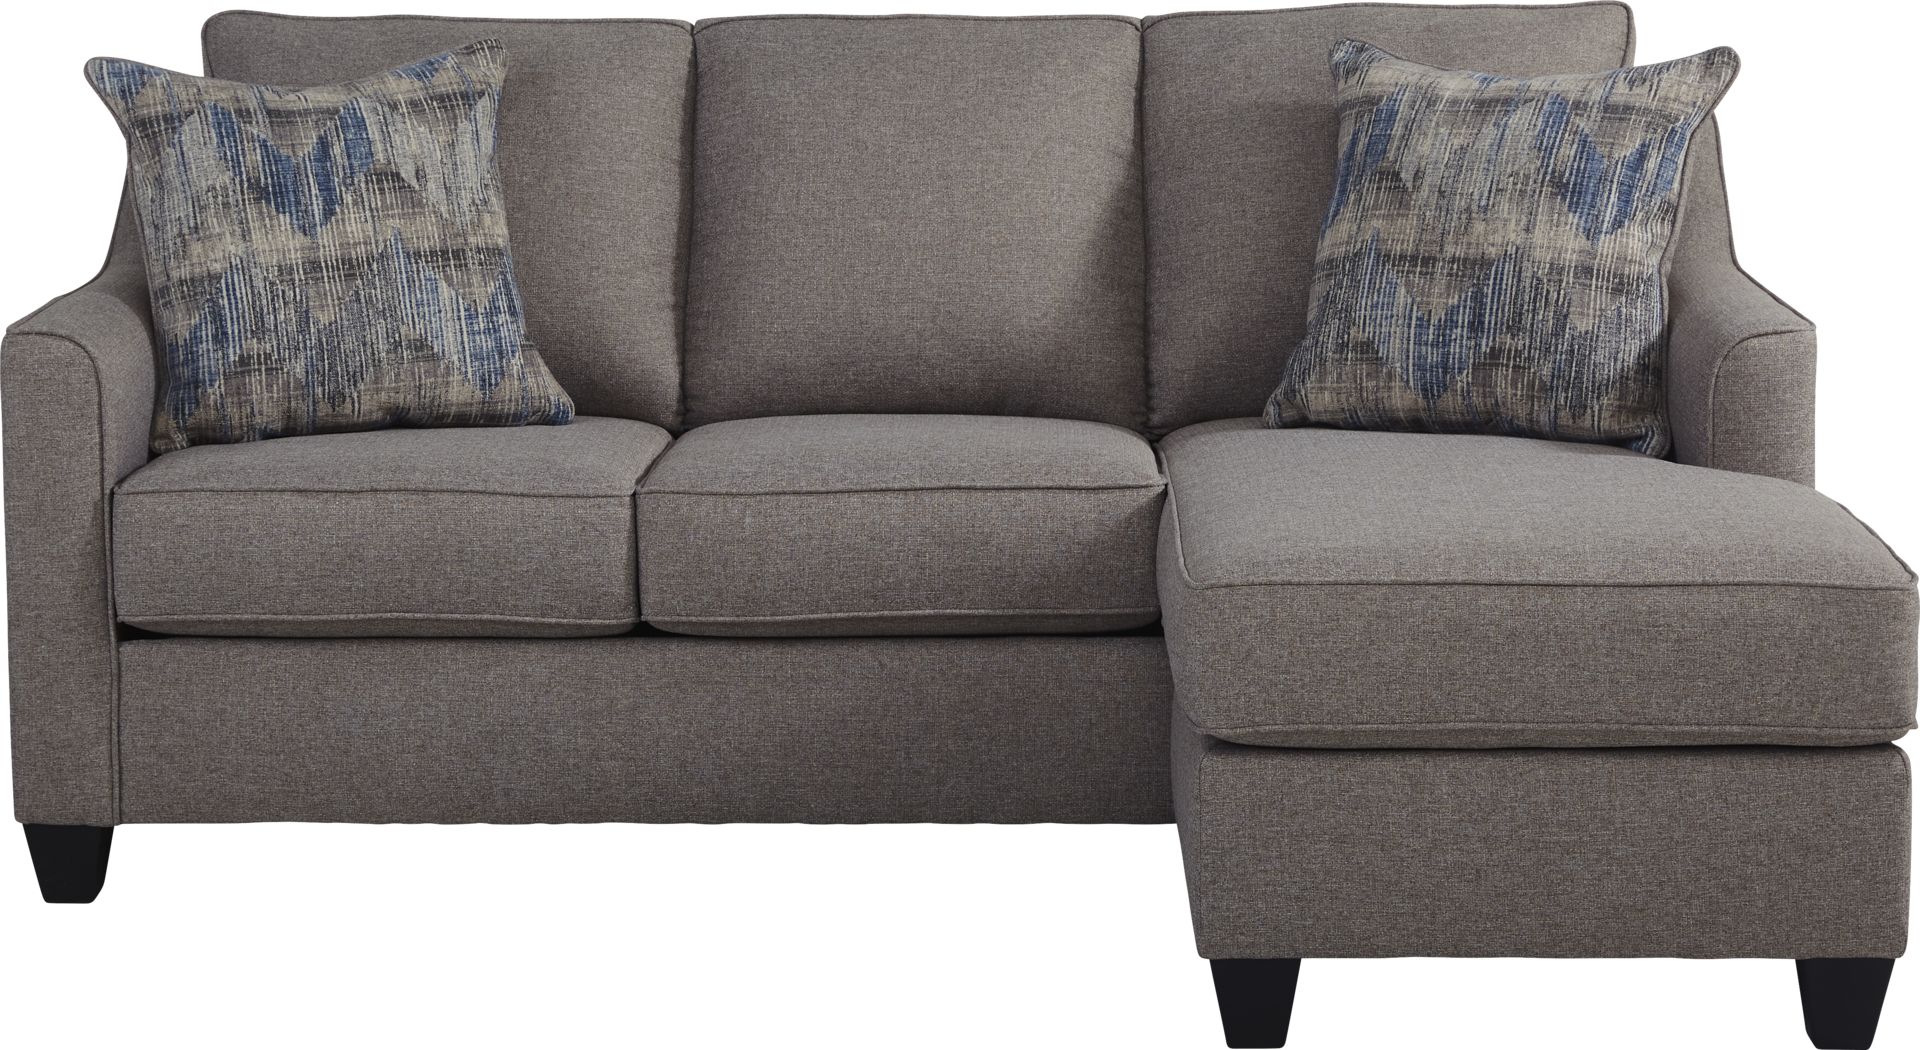 Nadler Gray Sofa Chaise - Rooms To Go